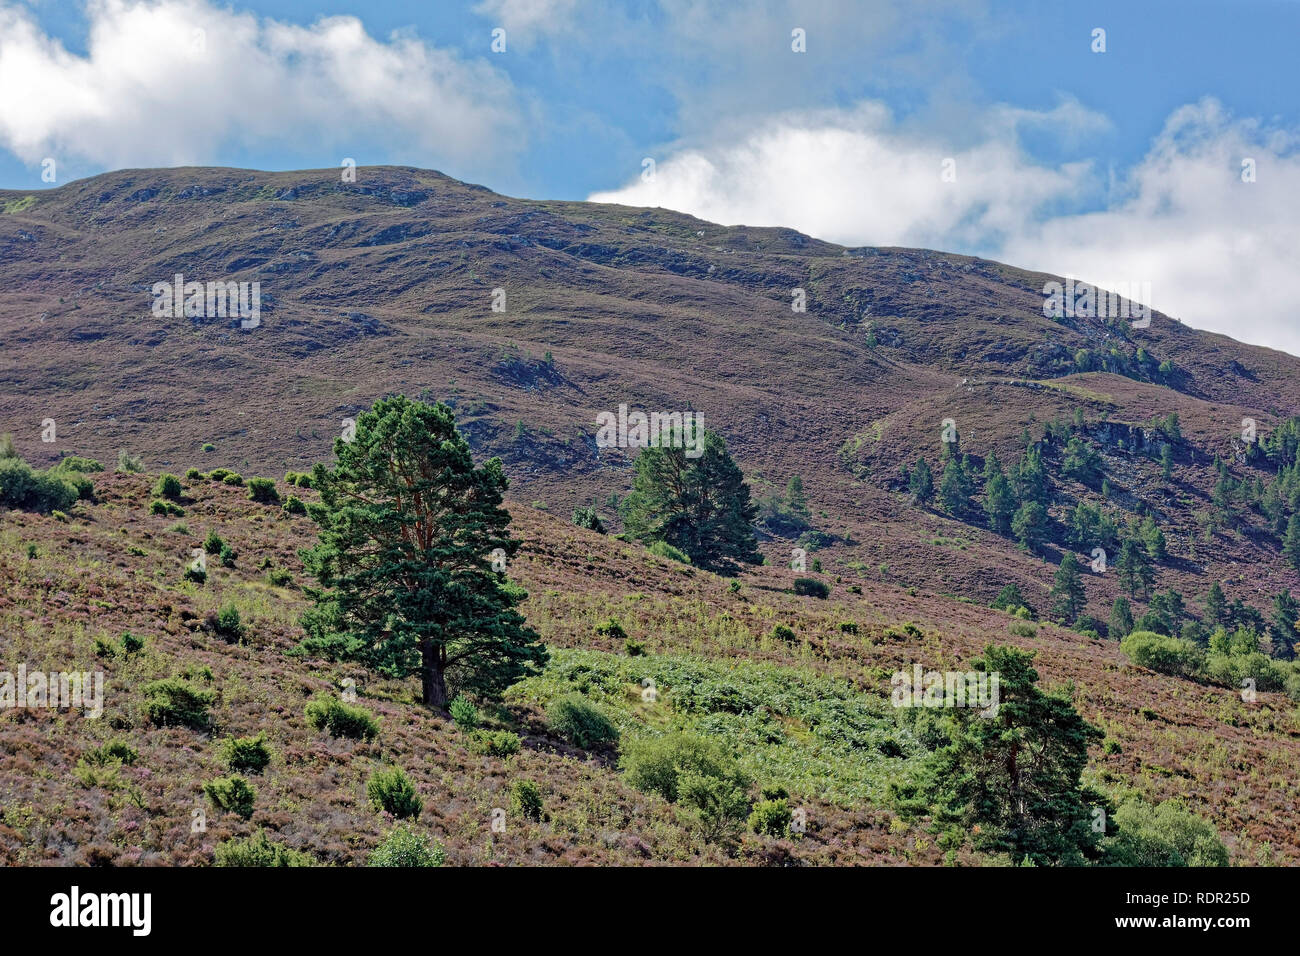 Scene in the Cairngorms National Park near Boat of Garten in summer with heather flowering on mountain. Stock Photo